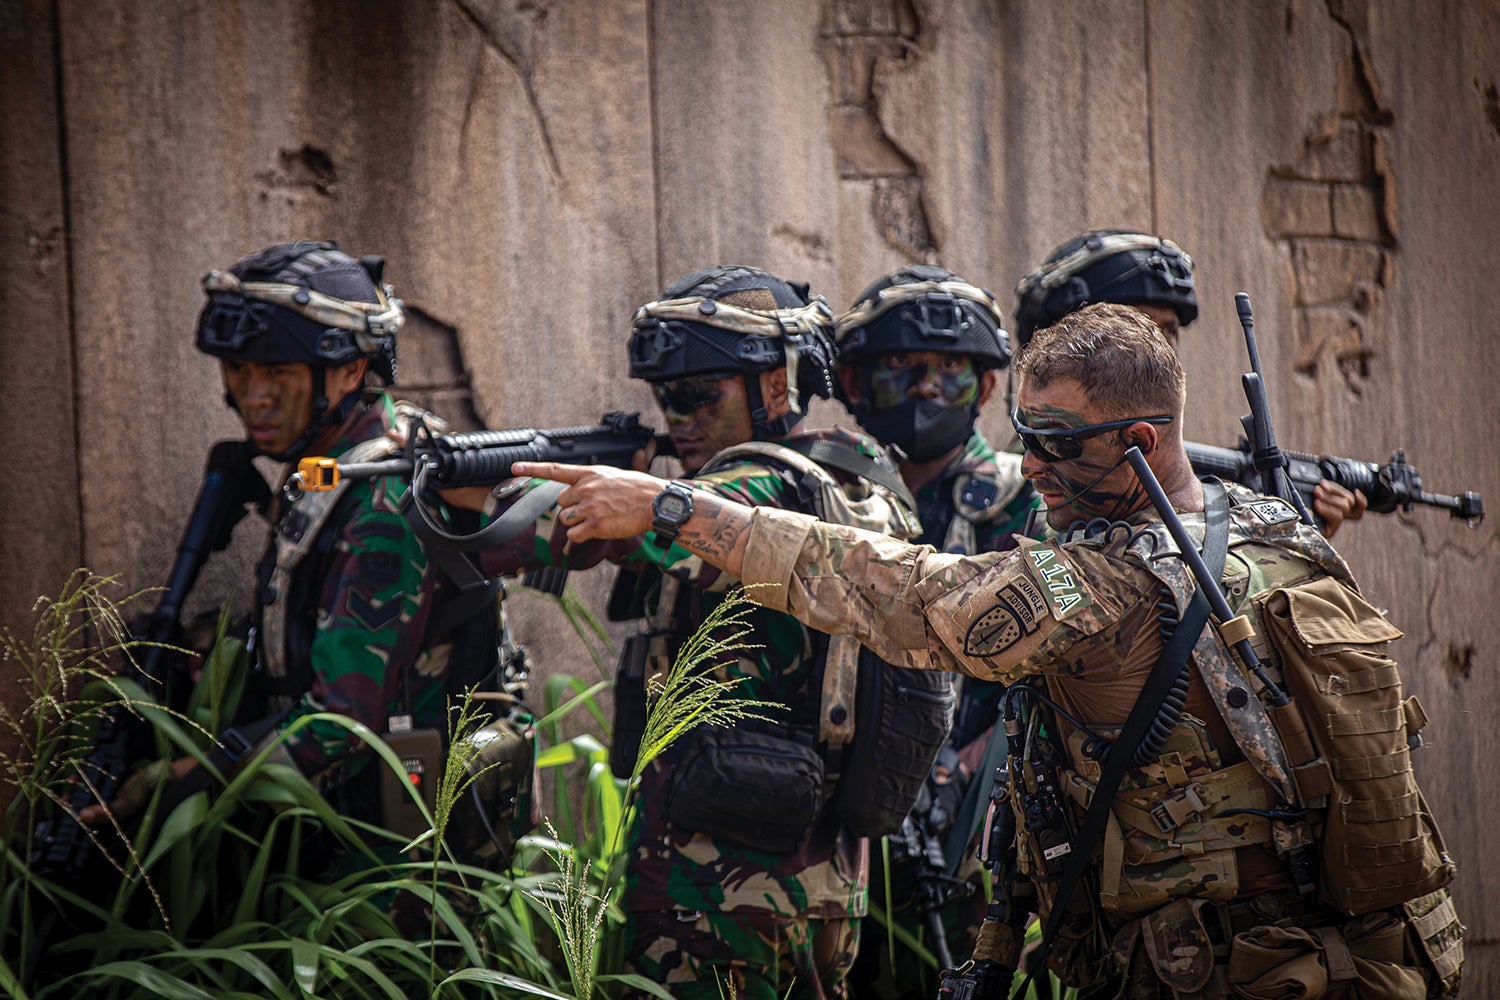 Indonesian troops take direction from Staff Sgt. Jeremy Mireles, a U.S. Army adviser, during maneuvers at Schofield Barracks, Hawaii. (Credit: U.S. Army/Spc. Aleksander Fomin)